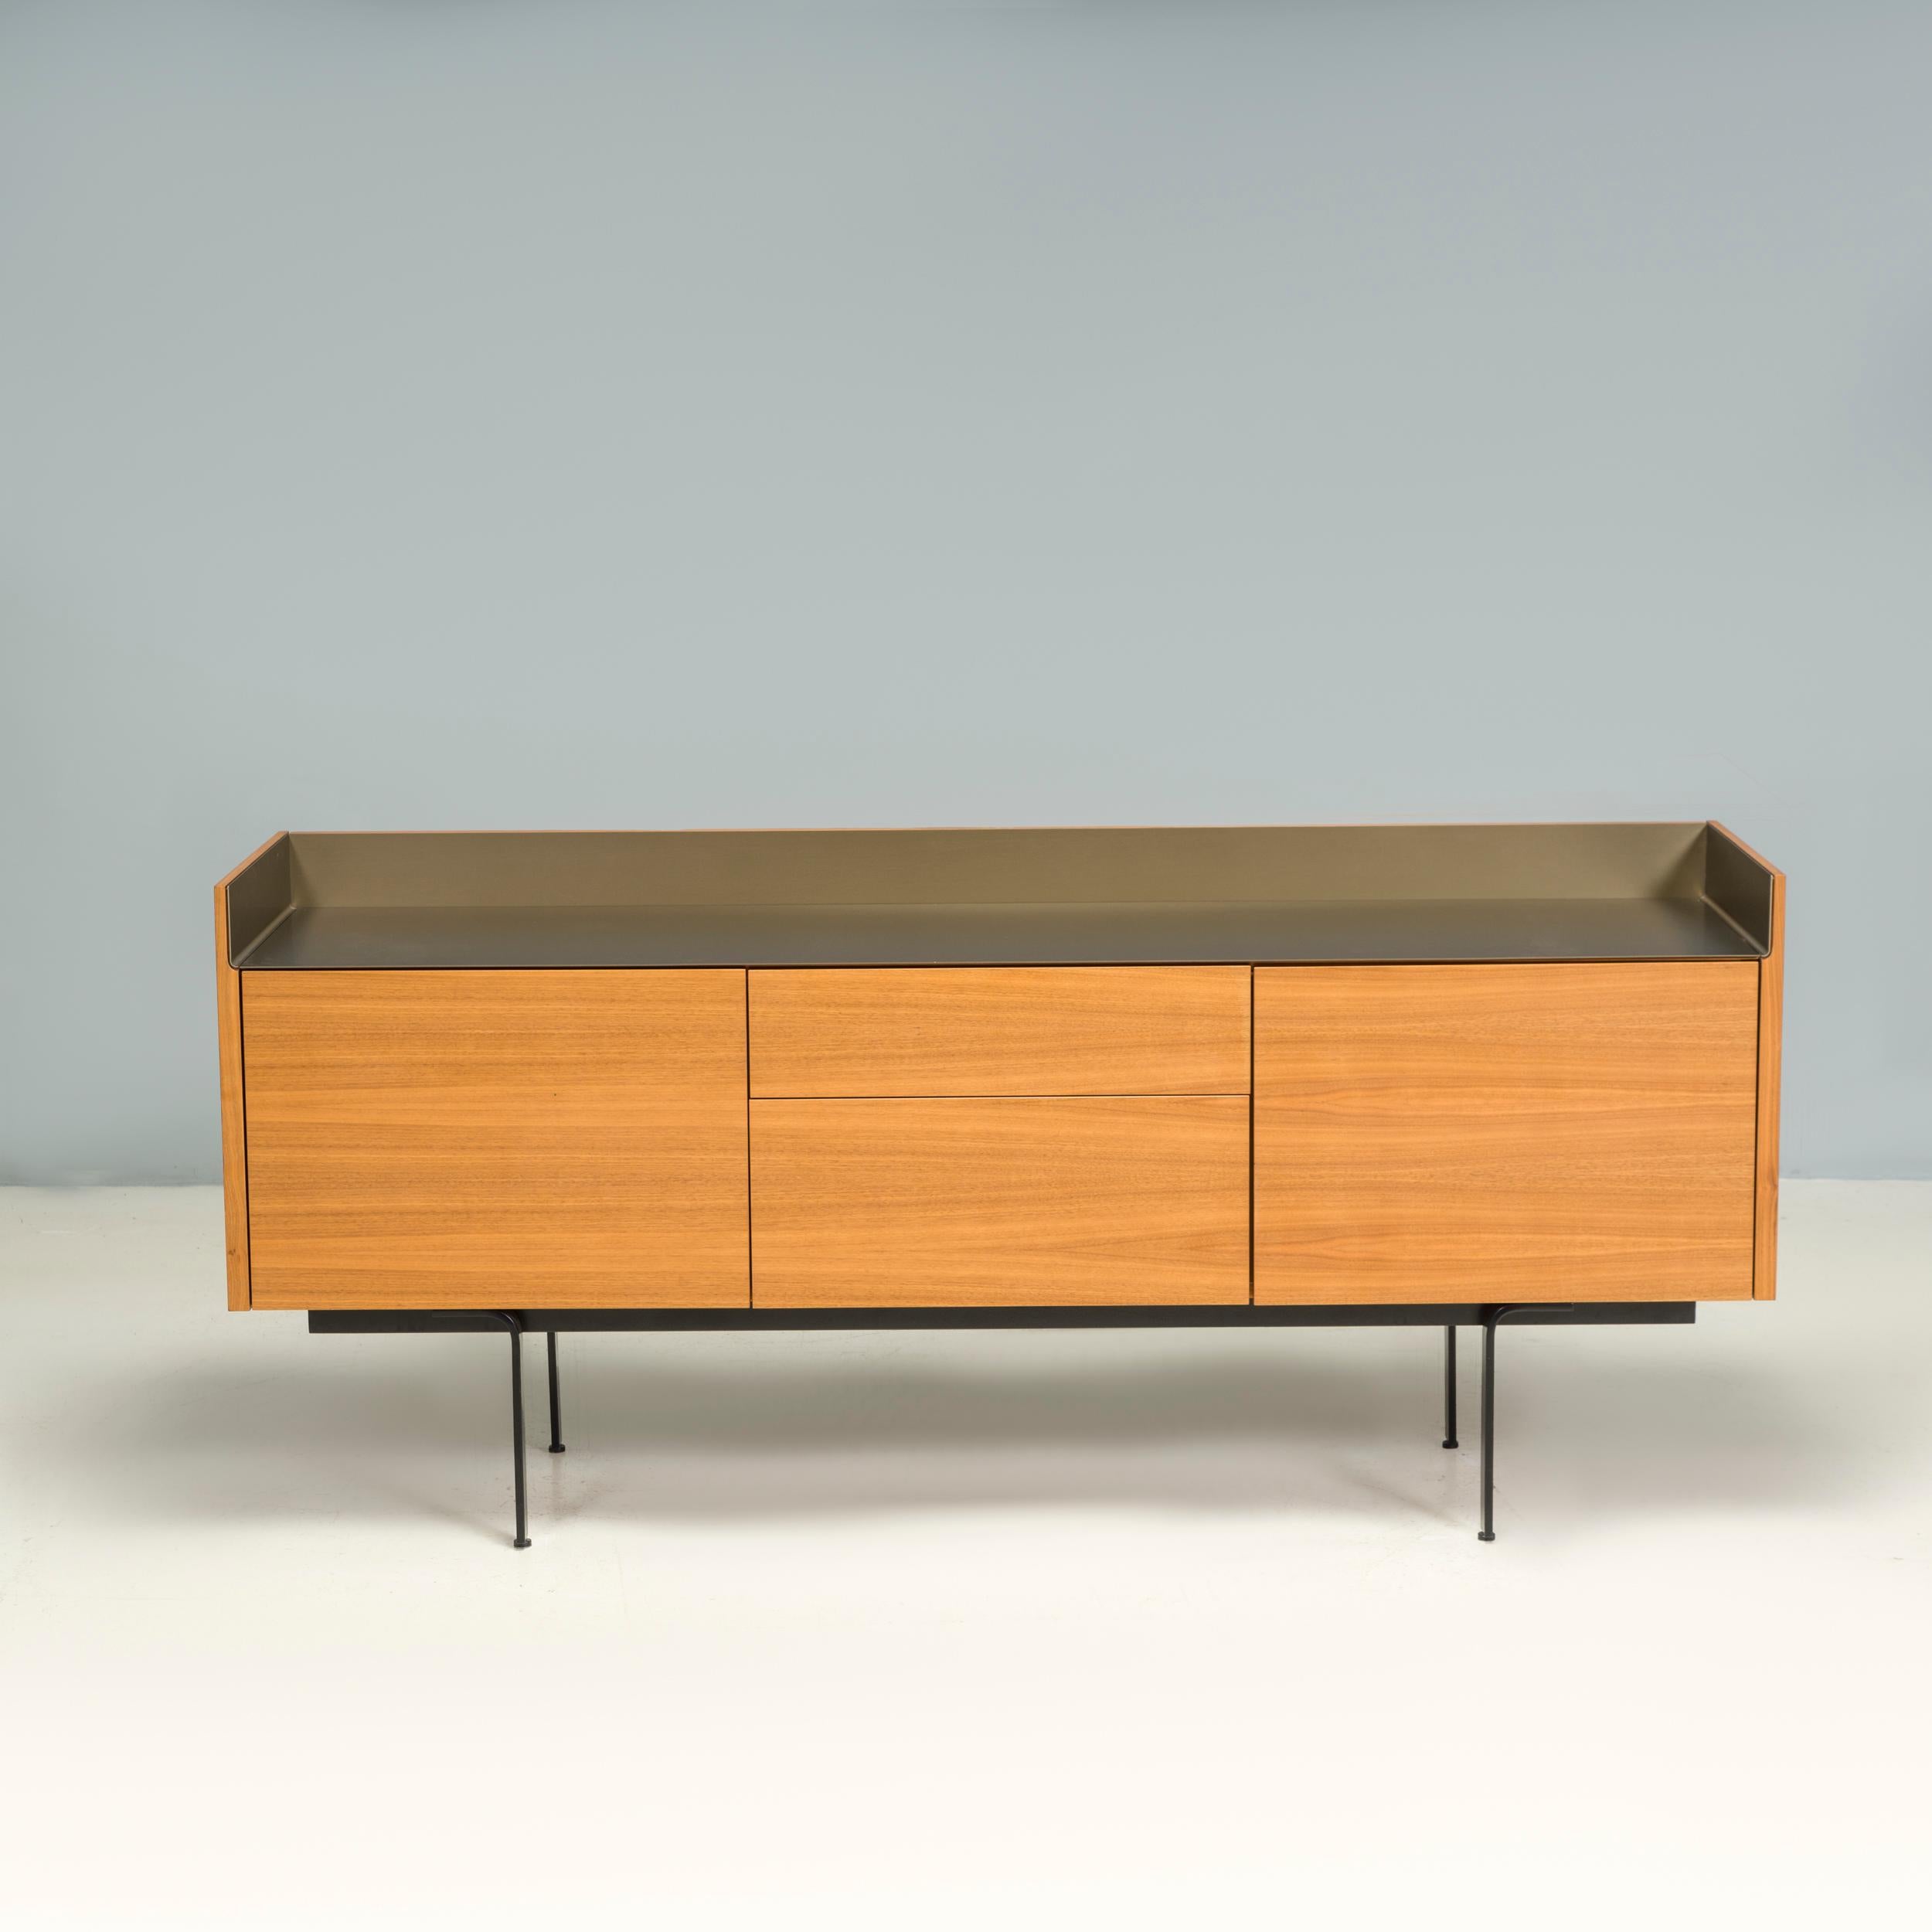 Designed by Mario Ruiz for Punt, the Stockholm sideboard won the Red Dot Design Award in 2015.

Sleek and sophisticated, the sideboard has a classic Scandinavian aesthetic and is constructed from an oak veneer, sitting on discreet metal legs.

The